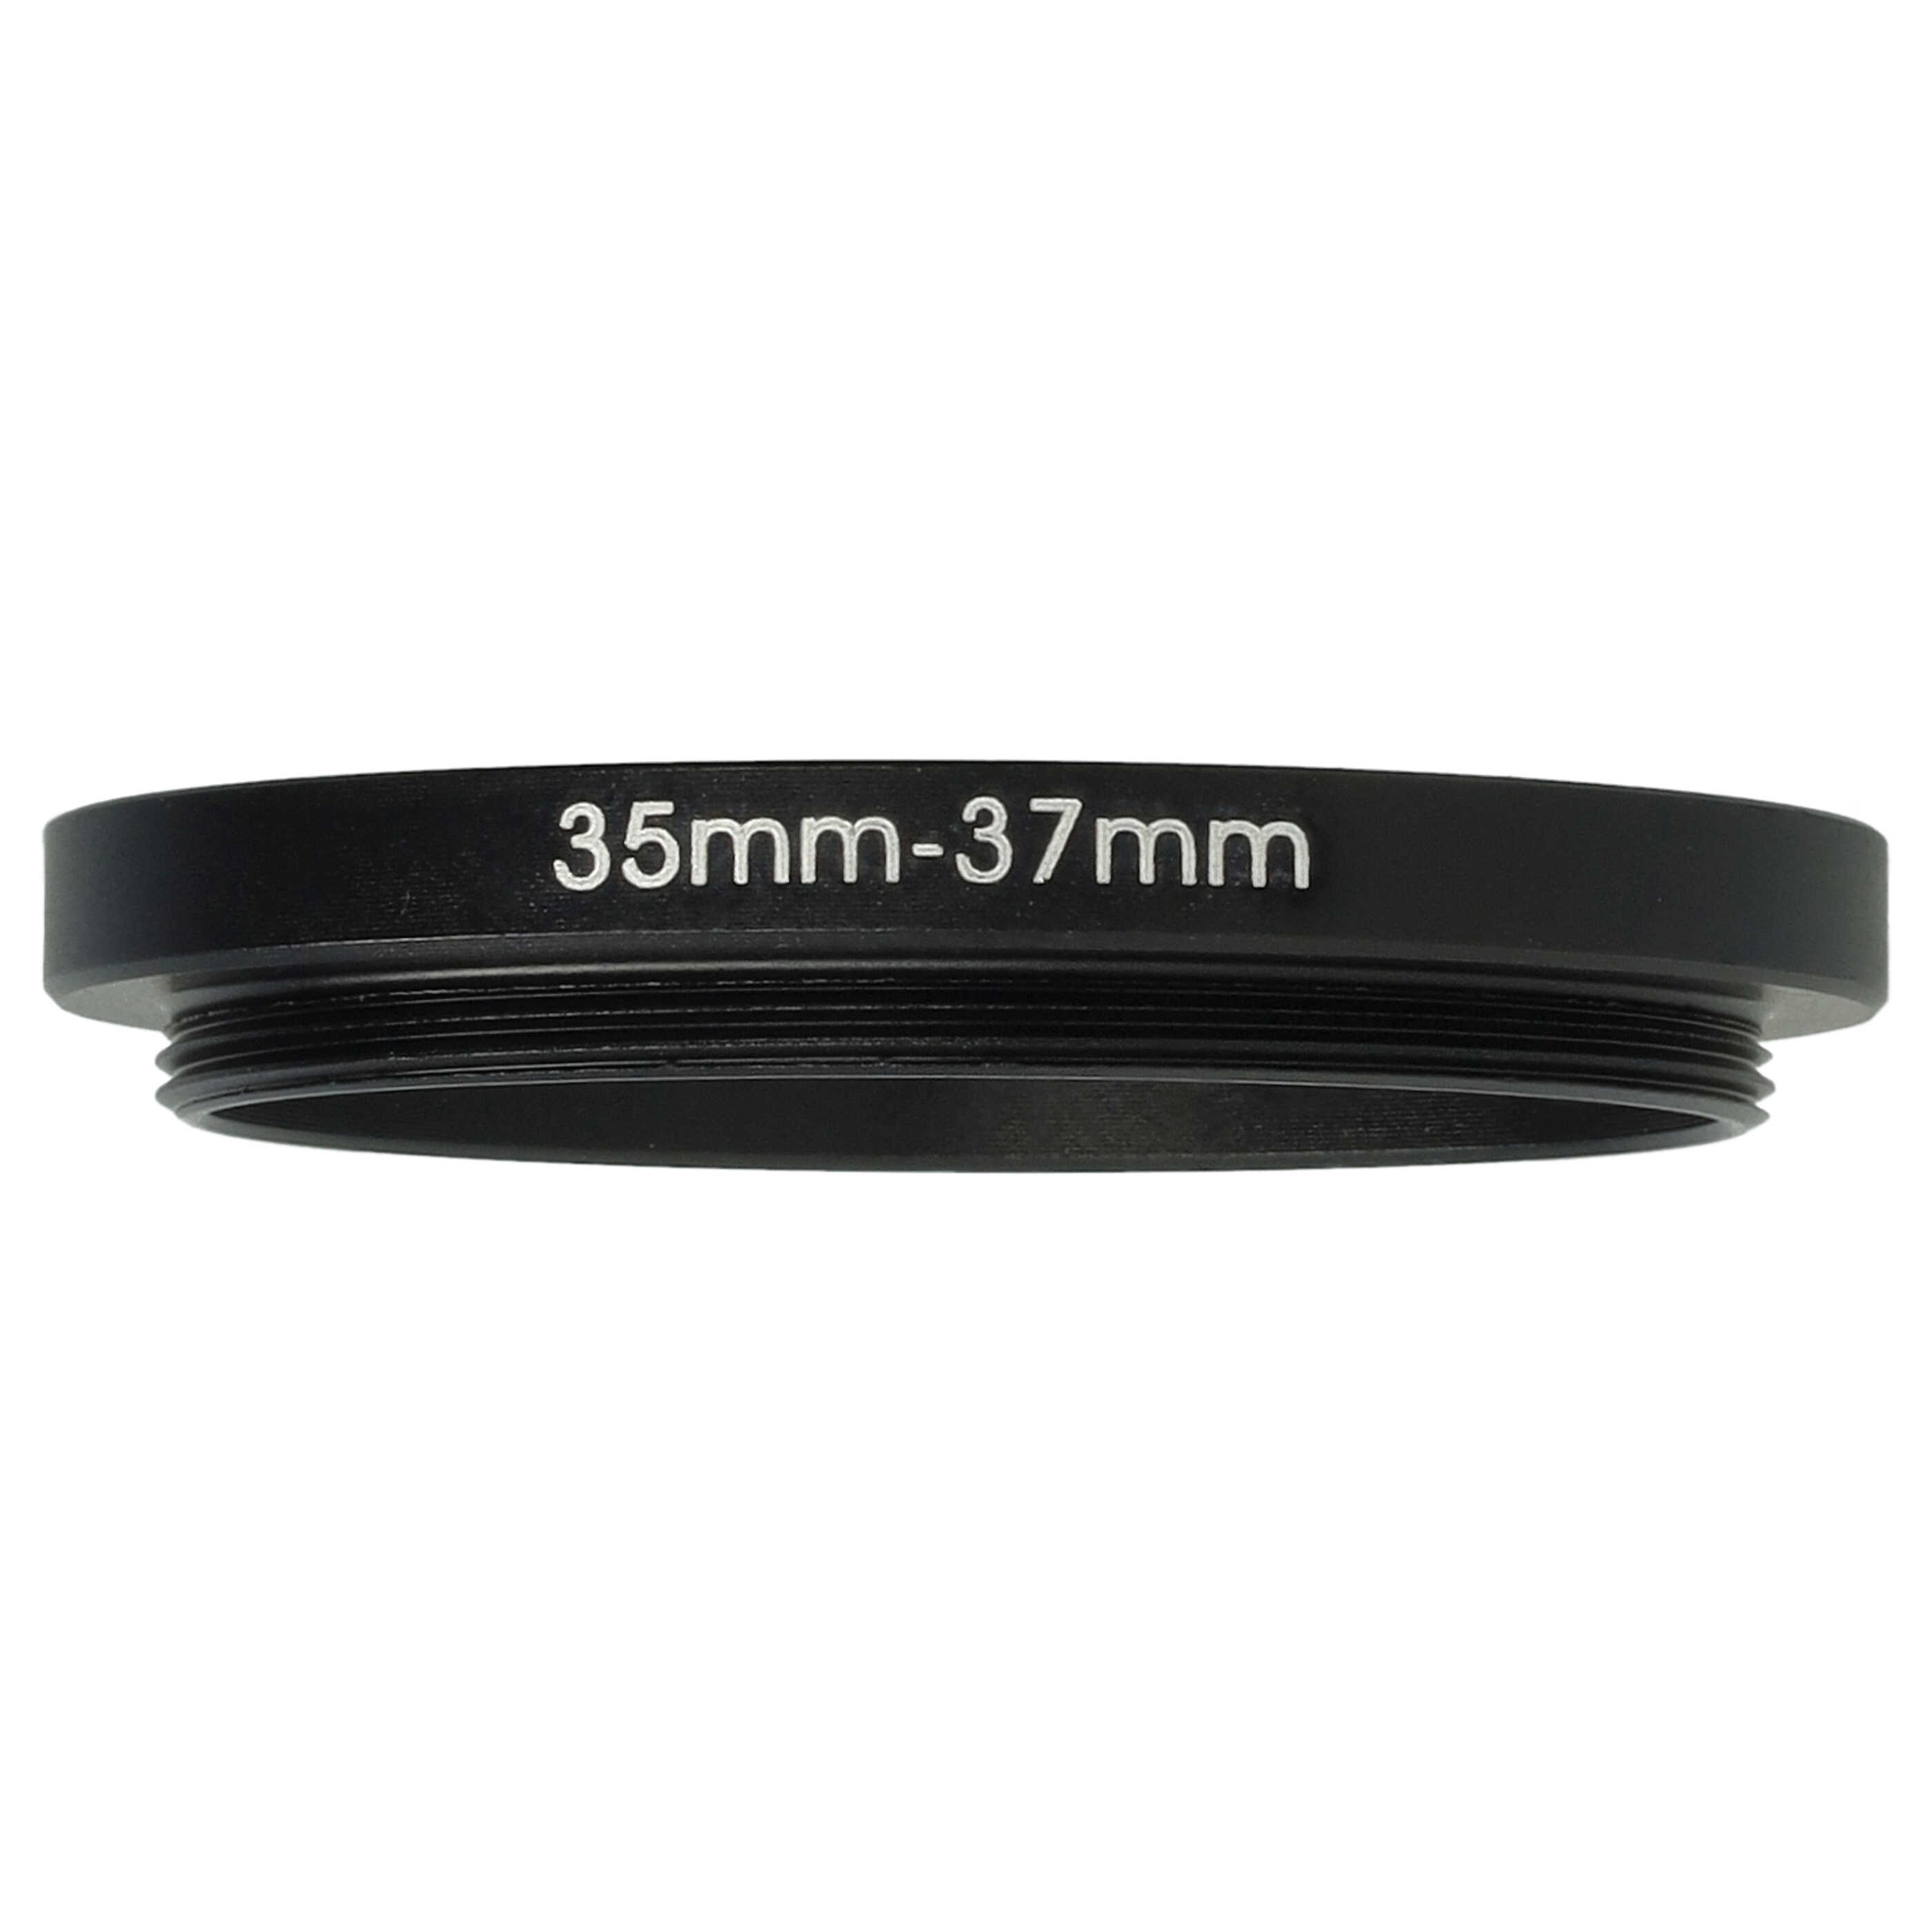 Step-Up Ring Adapter of 35 mm to 37 mmfor various Camera Lens - Filter Adapter